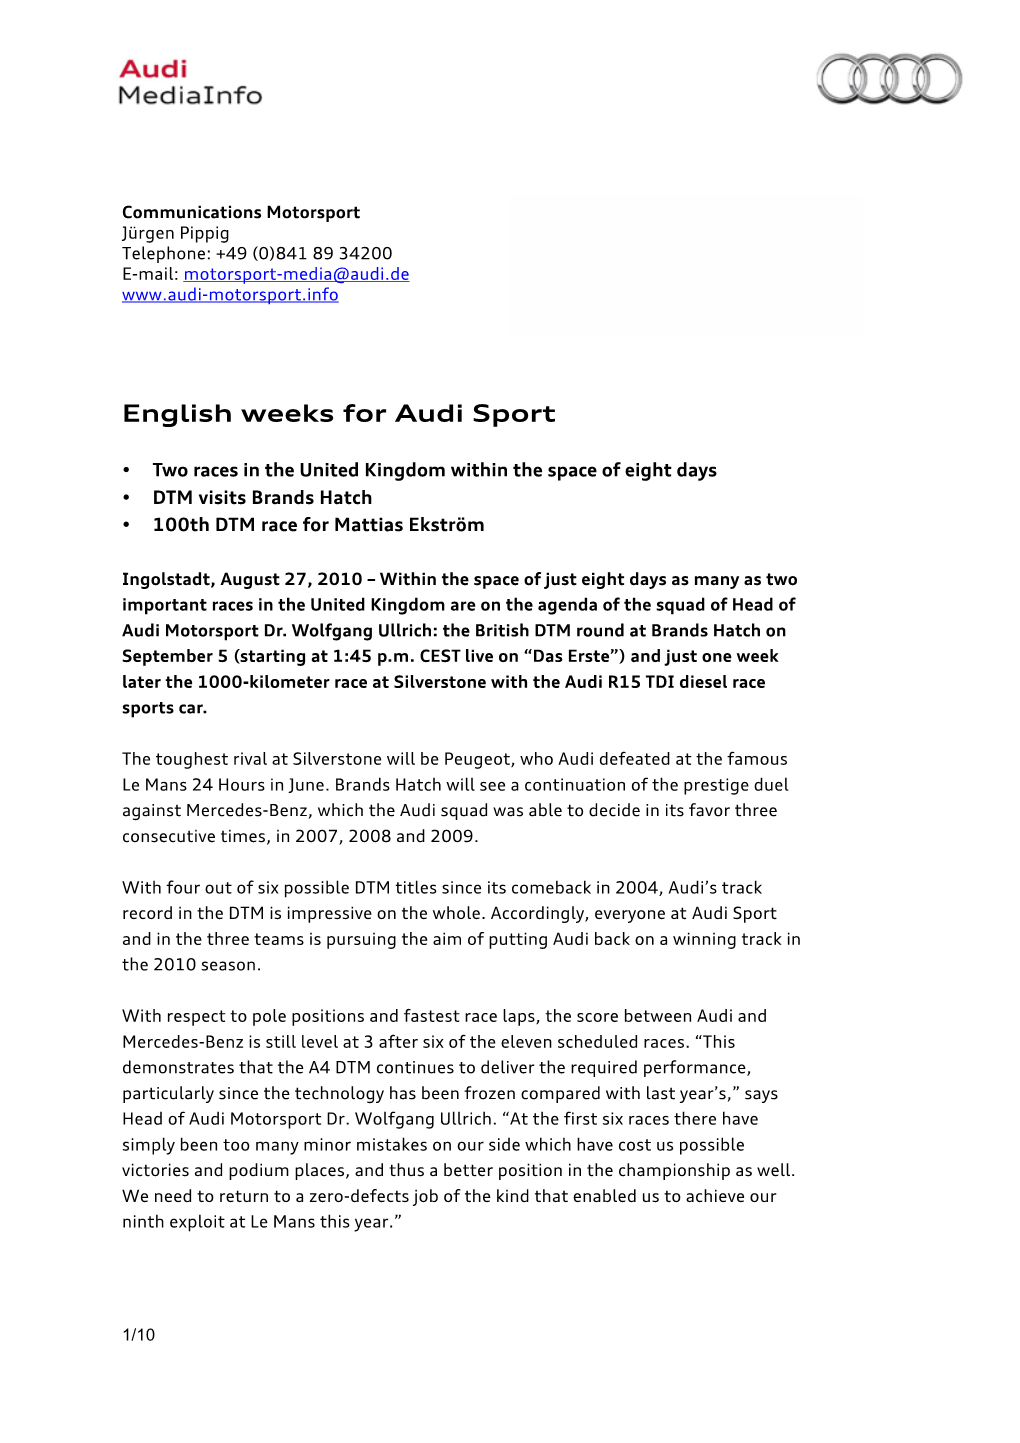 English Weeks for Audi Sport